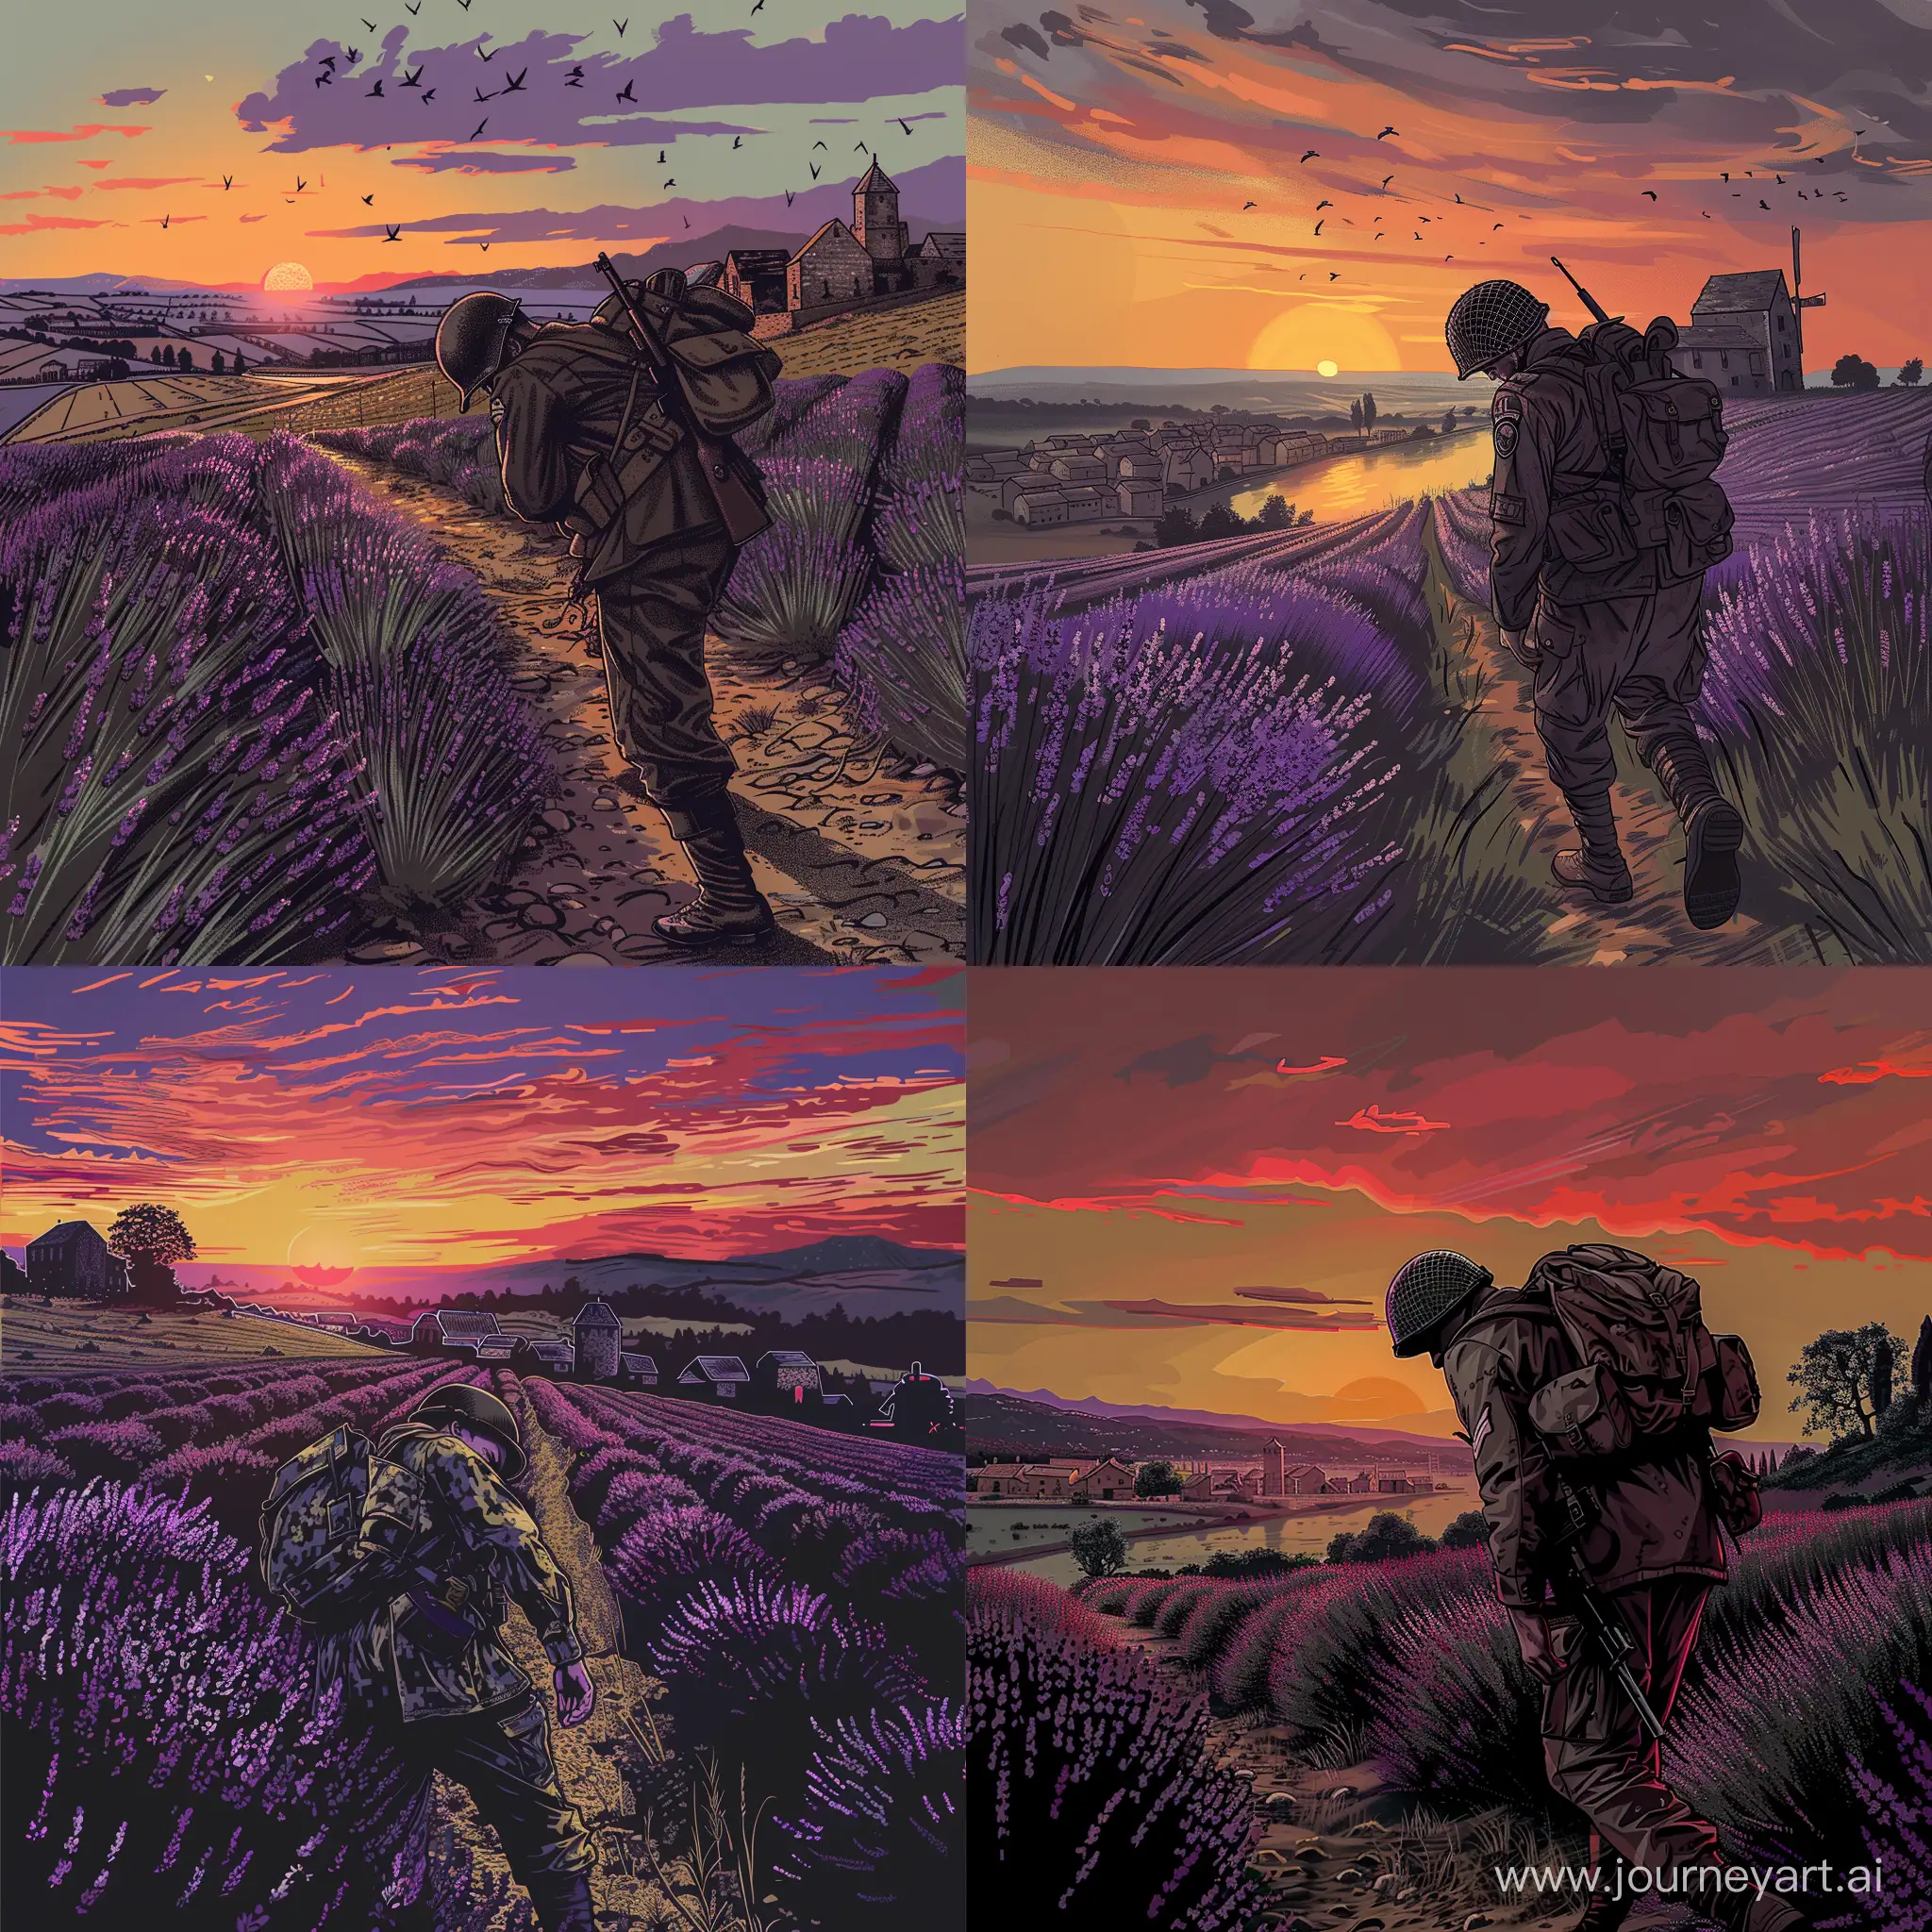 WWII-Soldier-Reflecting-in-Provence-Lavender-Field-at-Sunset